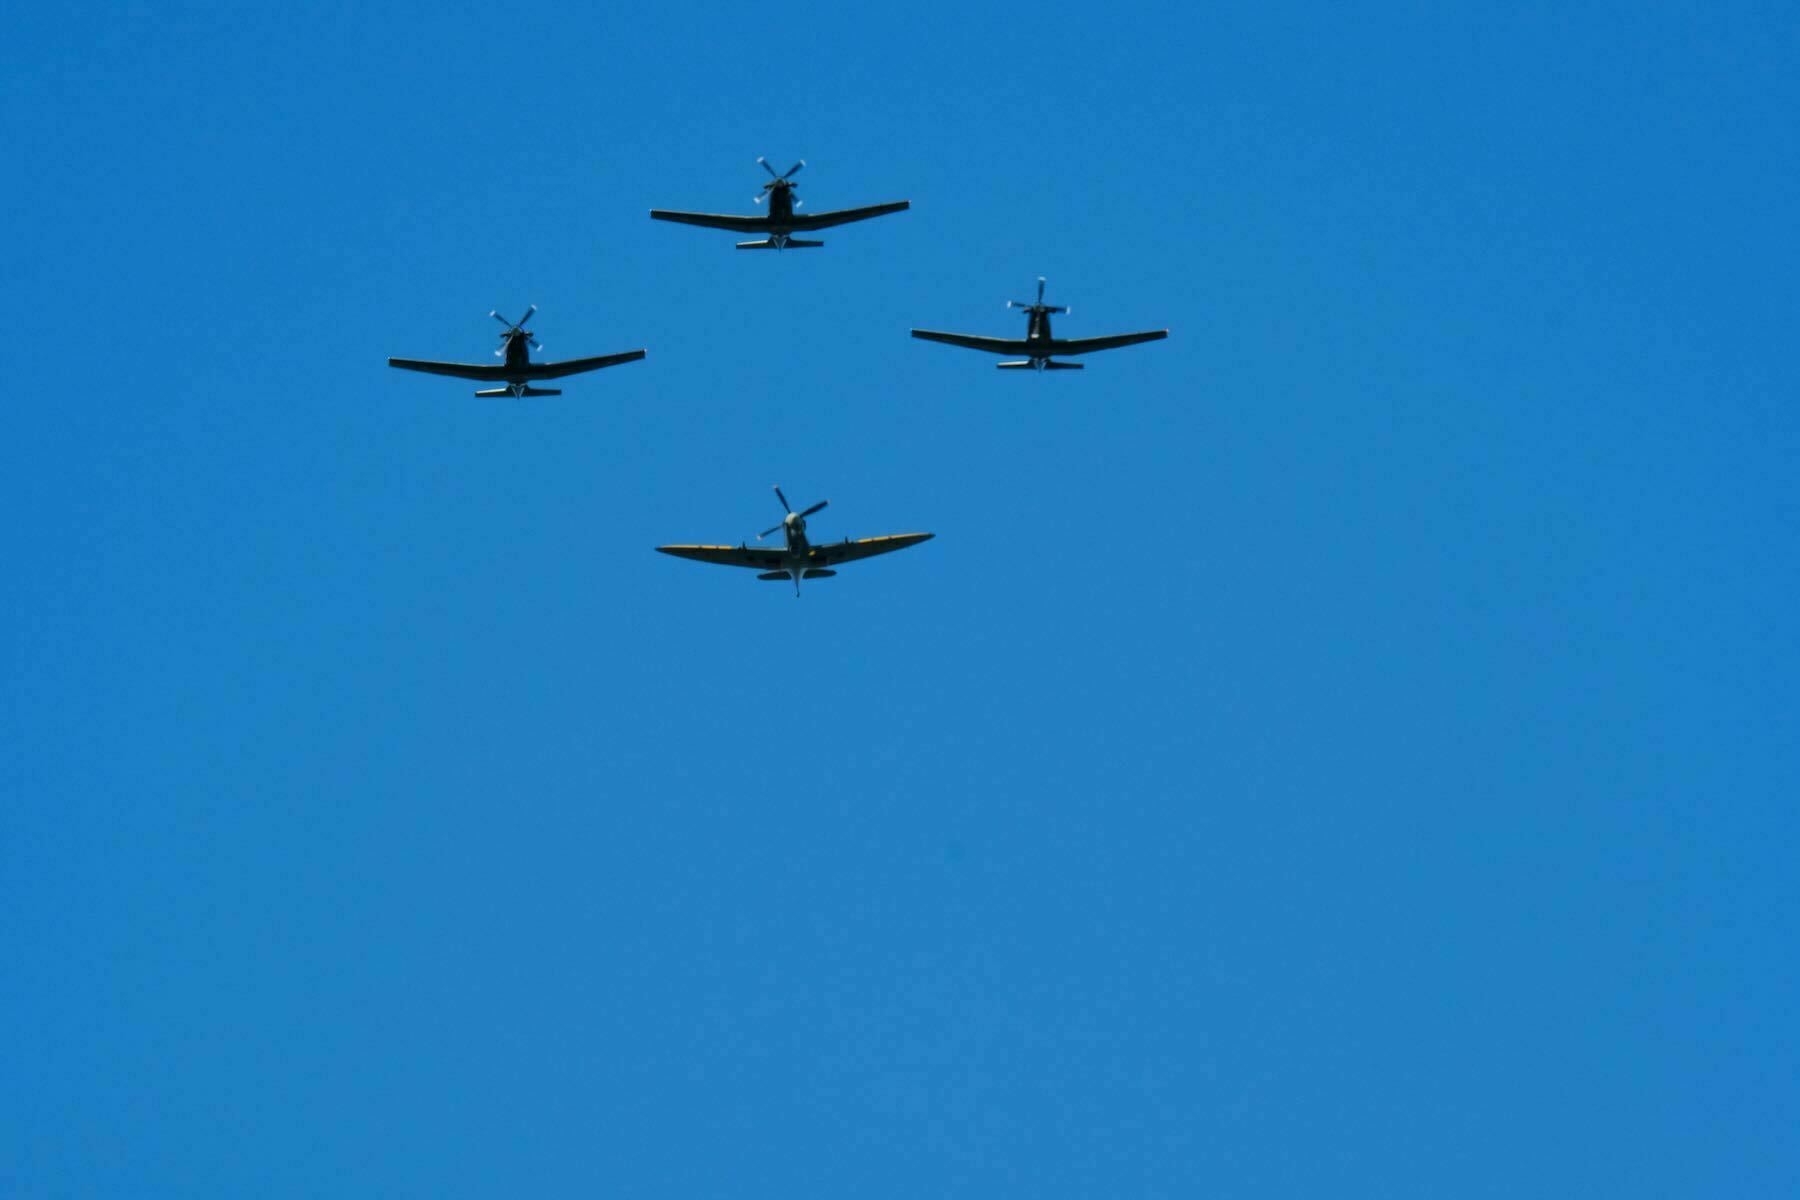 4 planes in a tight diamond formation heading straight for the camera.  